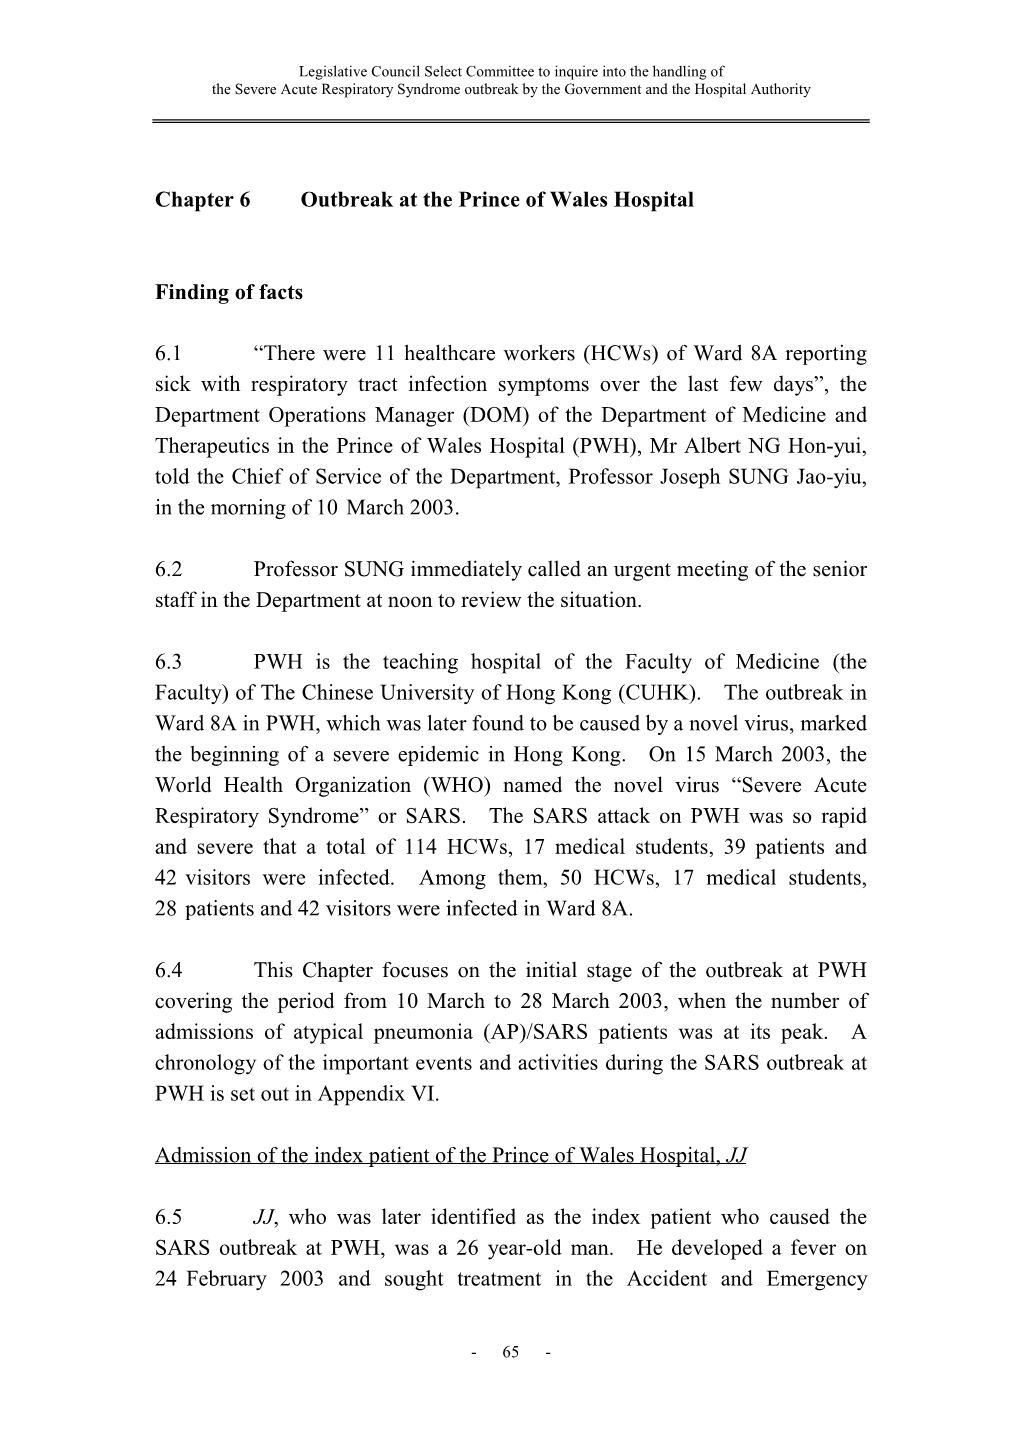 Chapter 6 Outbreak at the Prince of Wales Hospital Finding of Facts 6.1